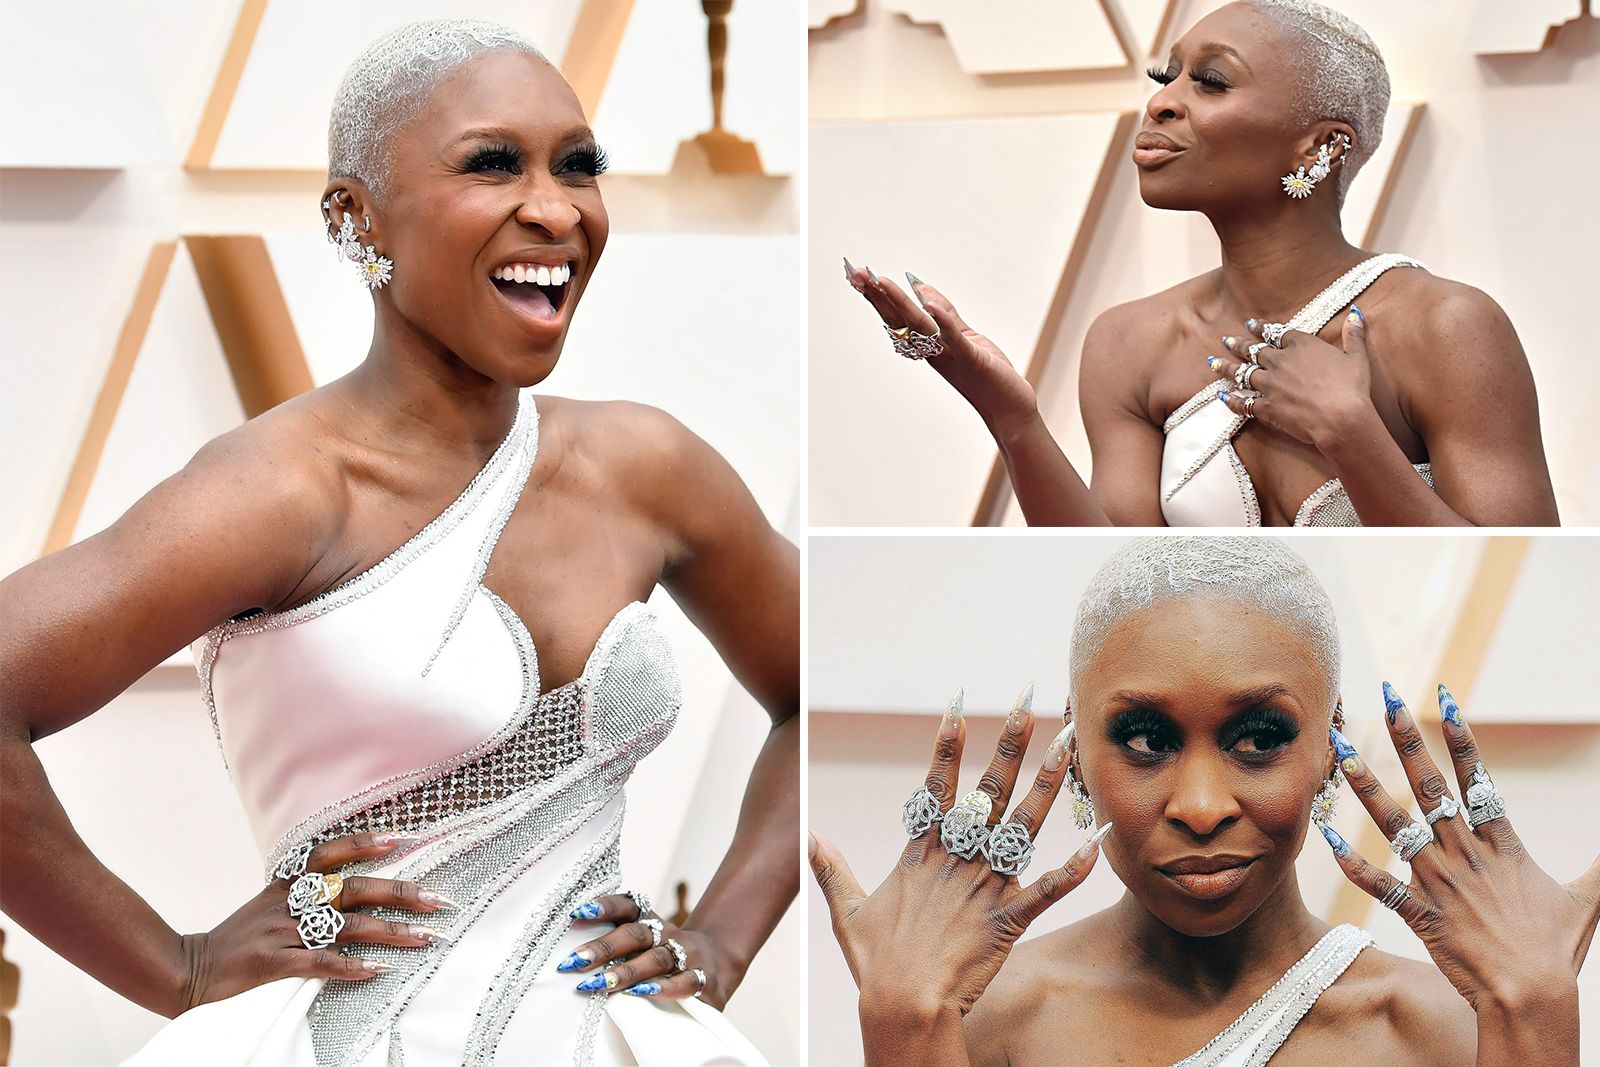 Actress and singer Cynthia Erivo in Atelier Versace at the 2020 Oscars wearing a confusing array of Piaget Possession white gold and diamond rings, Piaget Golden Oasis rings and four Piaget Rose diamond rings